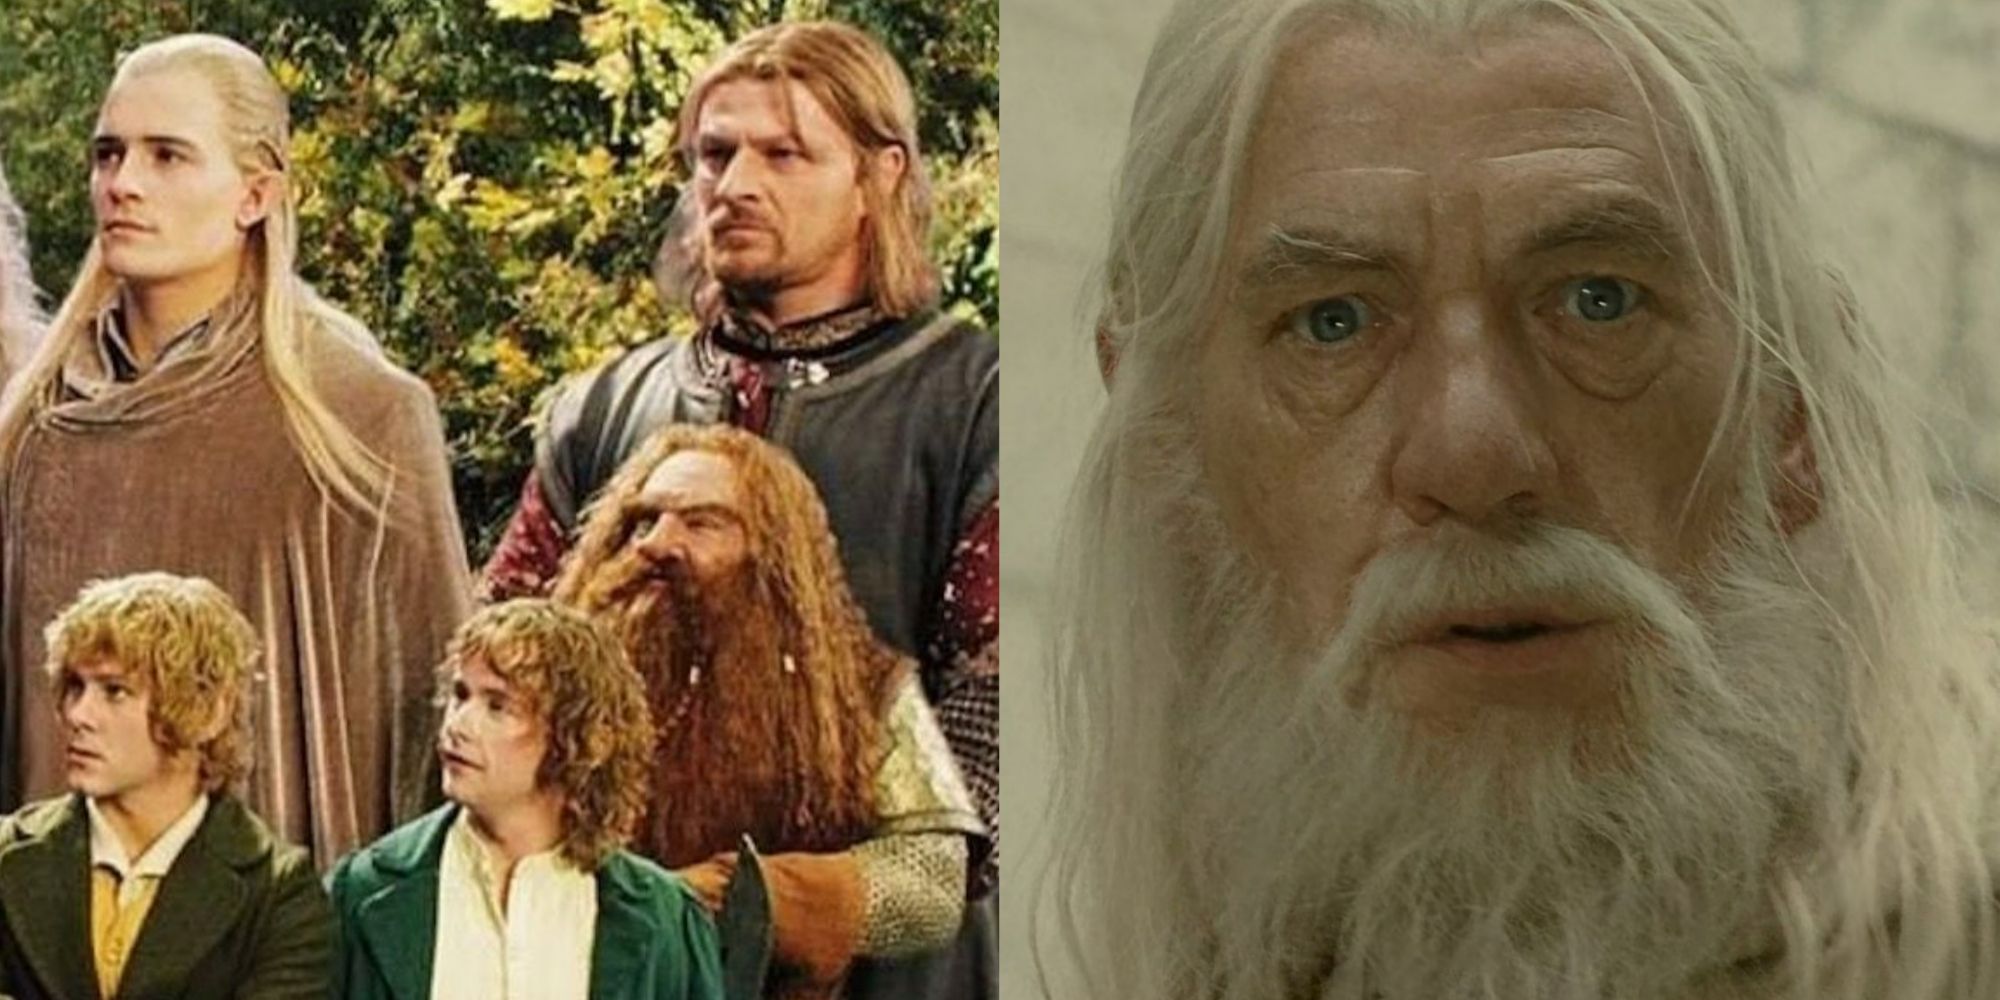 A split image showing the Fellowship on the left and Gandalf on the right from Lord of the Rings. 